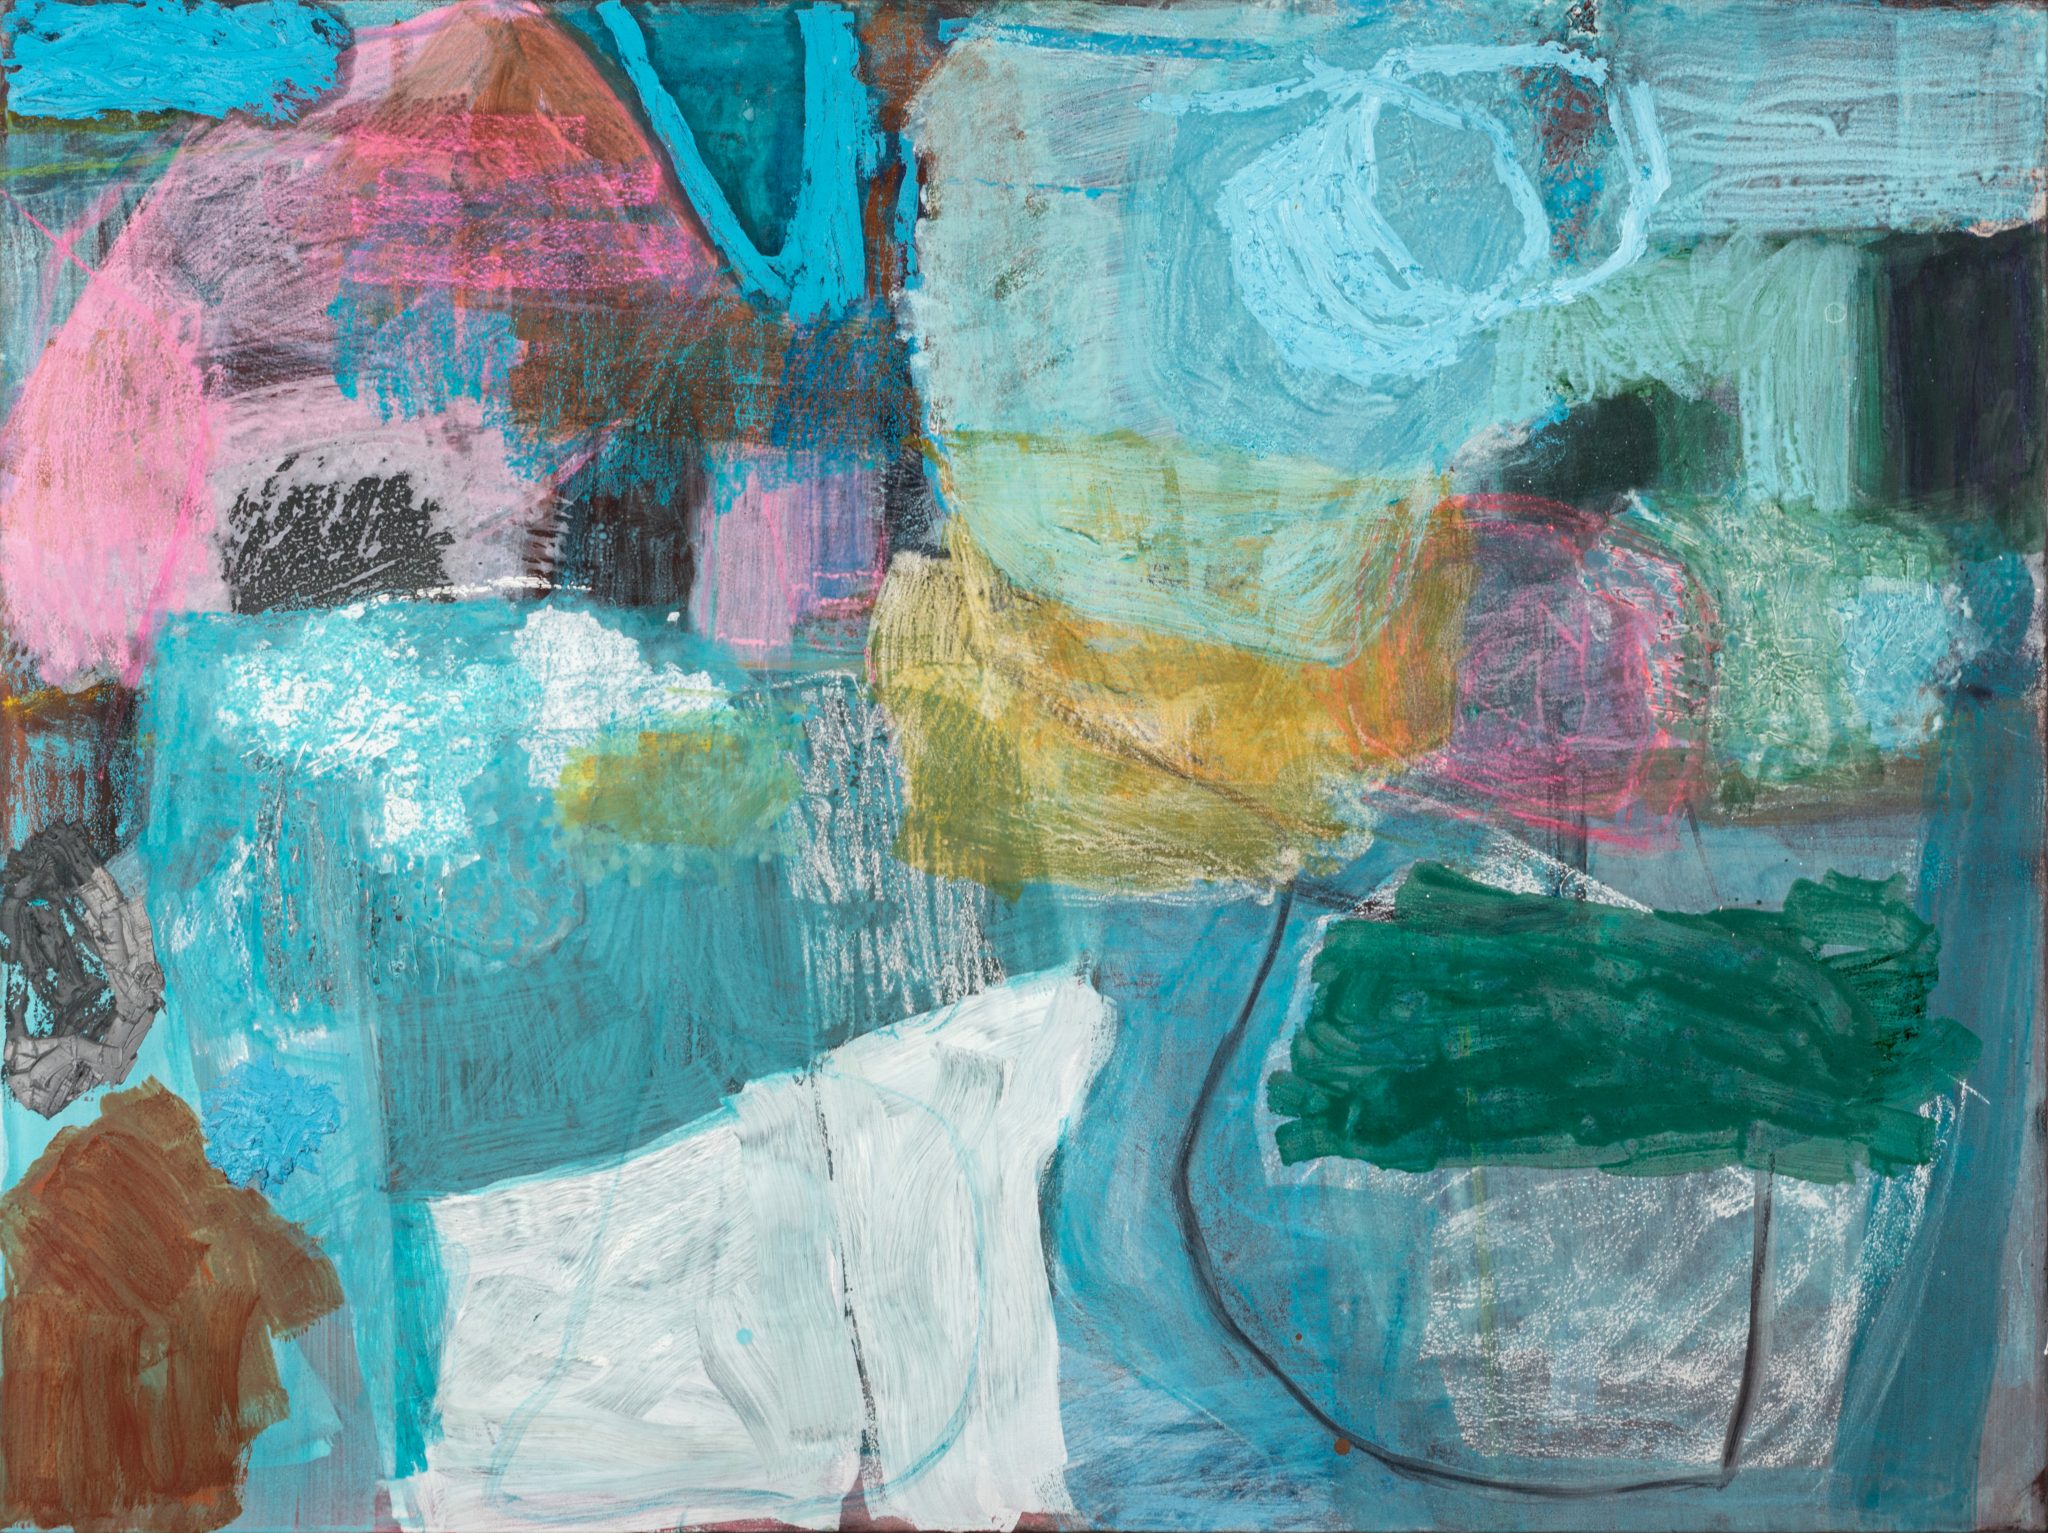 Seabird 2022 120x160cm raw pigment chalk and oil paint on canvas £6800 copy Paintings RECENT